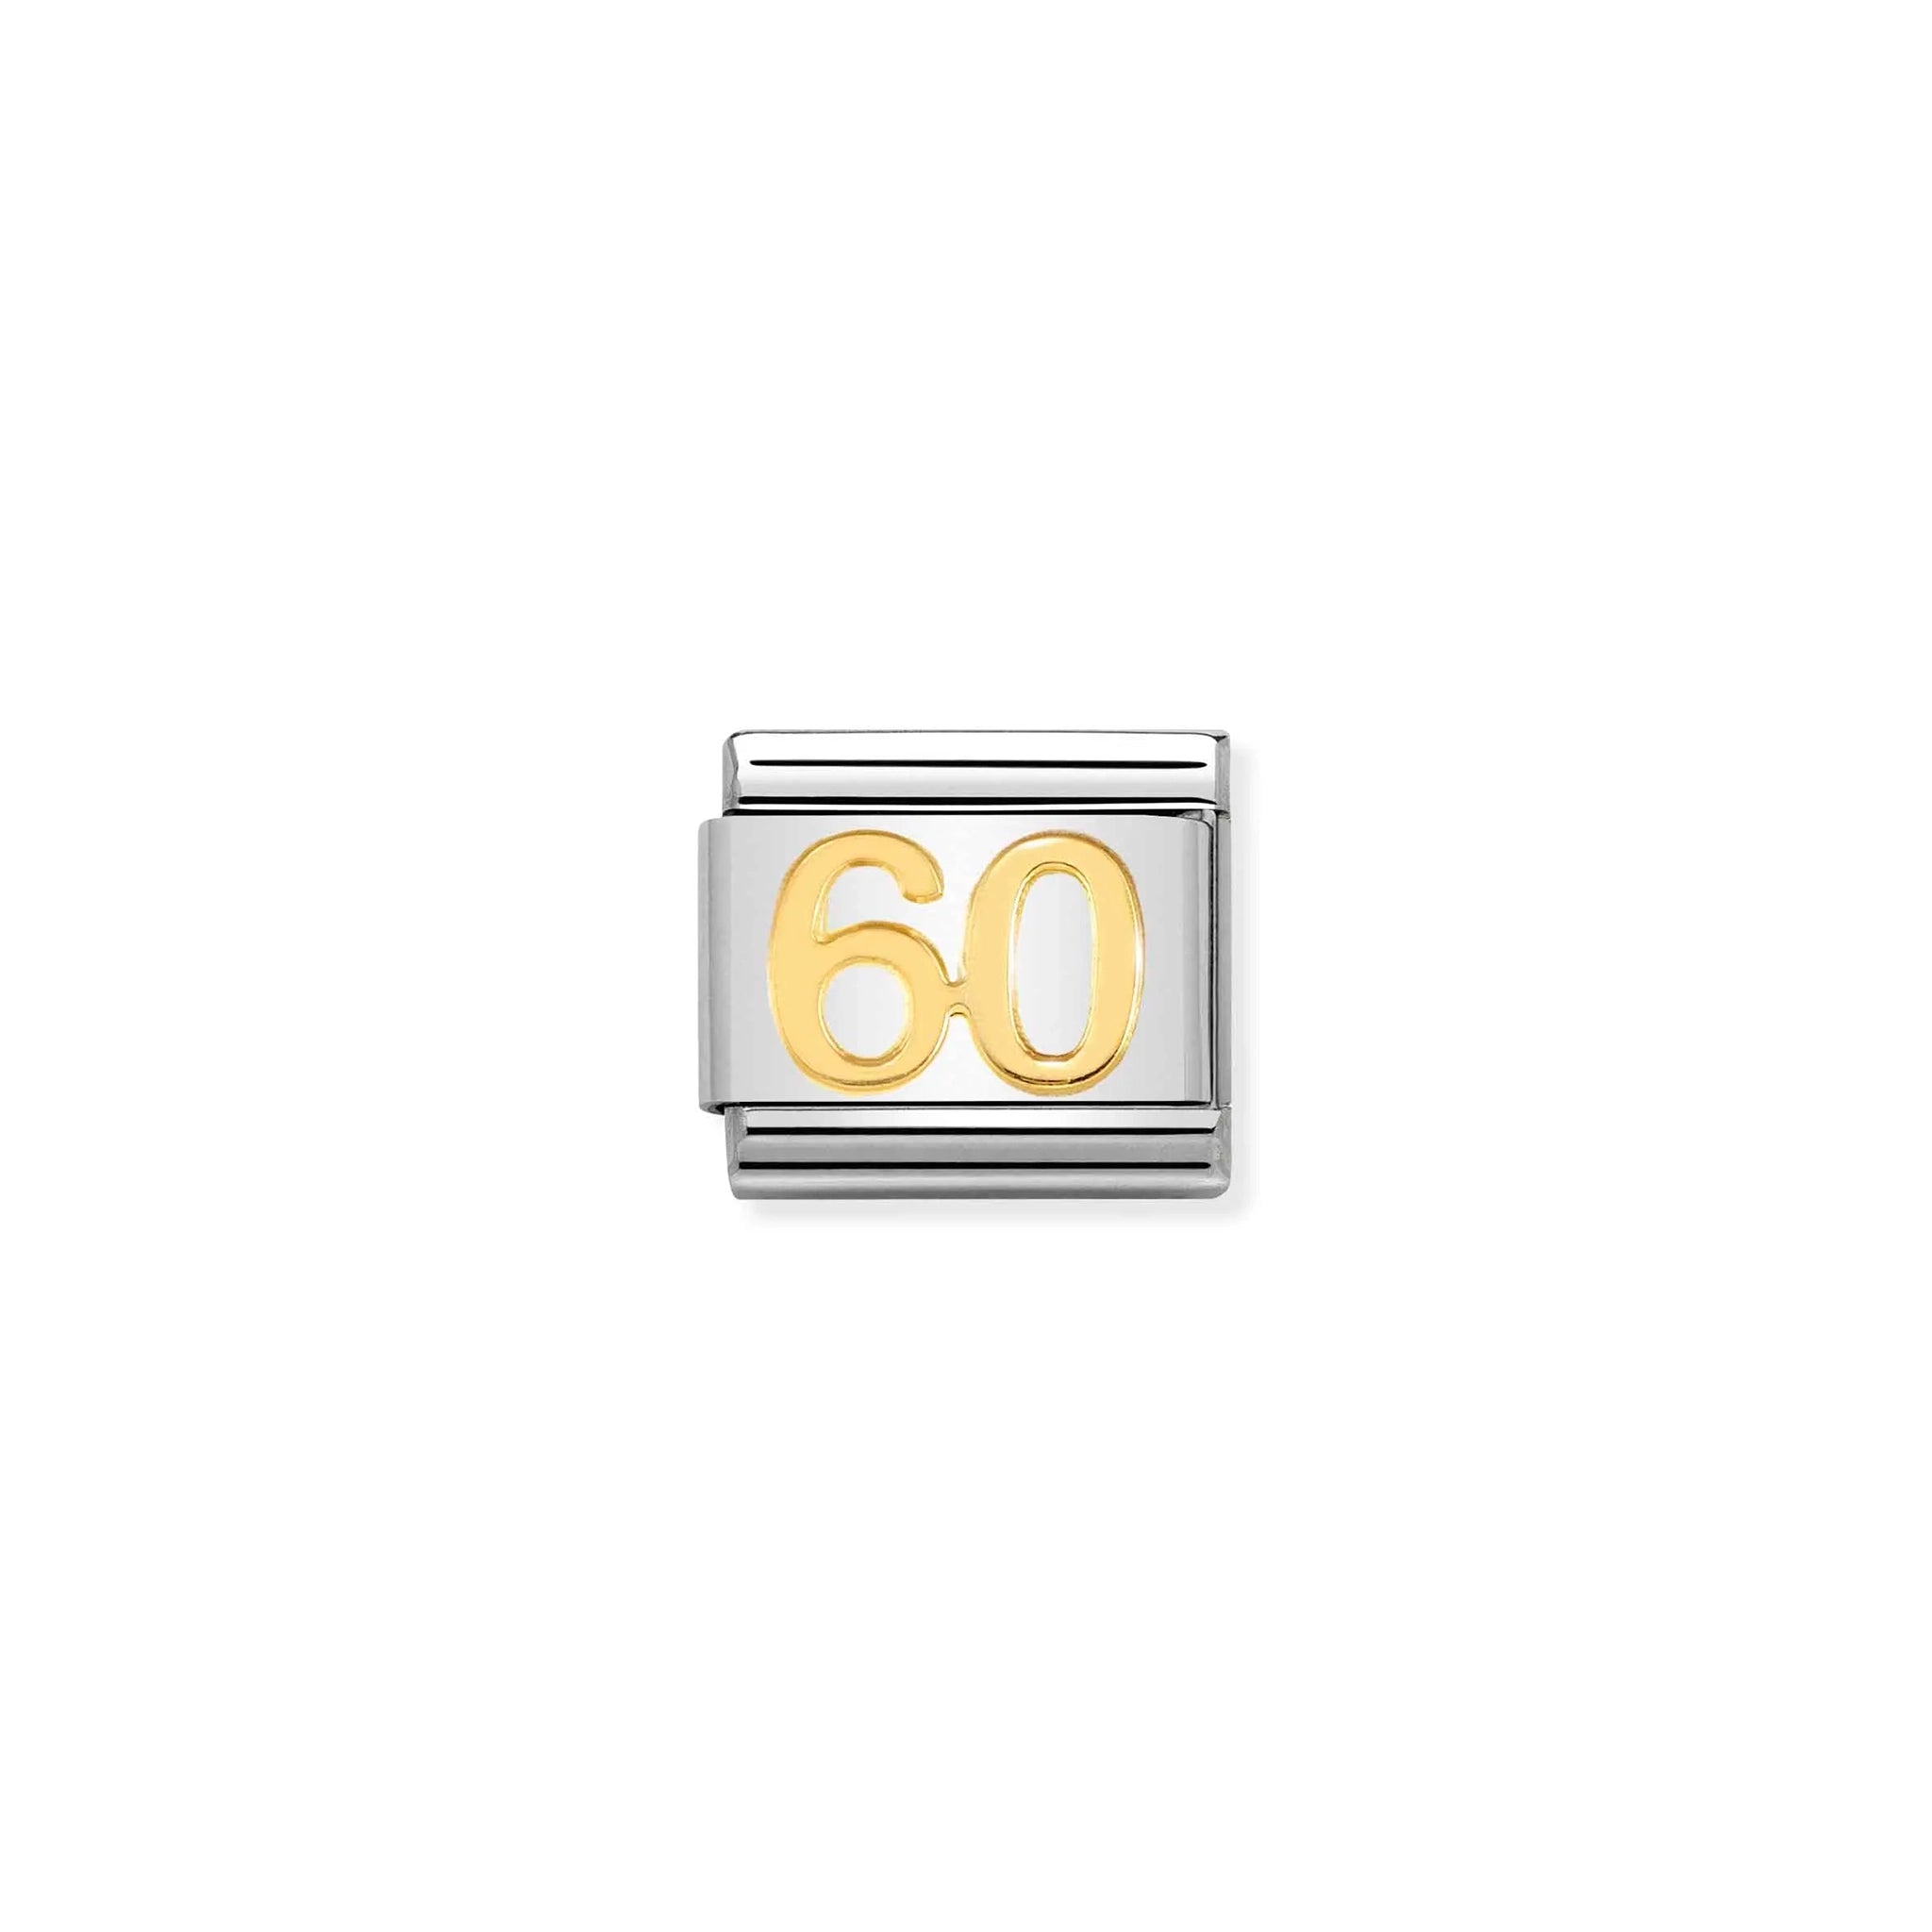 A Nomination charm link featuring a plain gold number 60